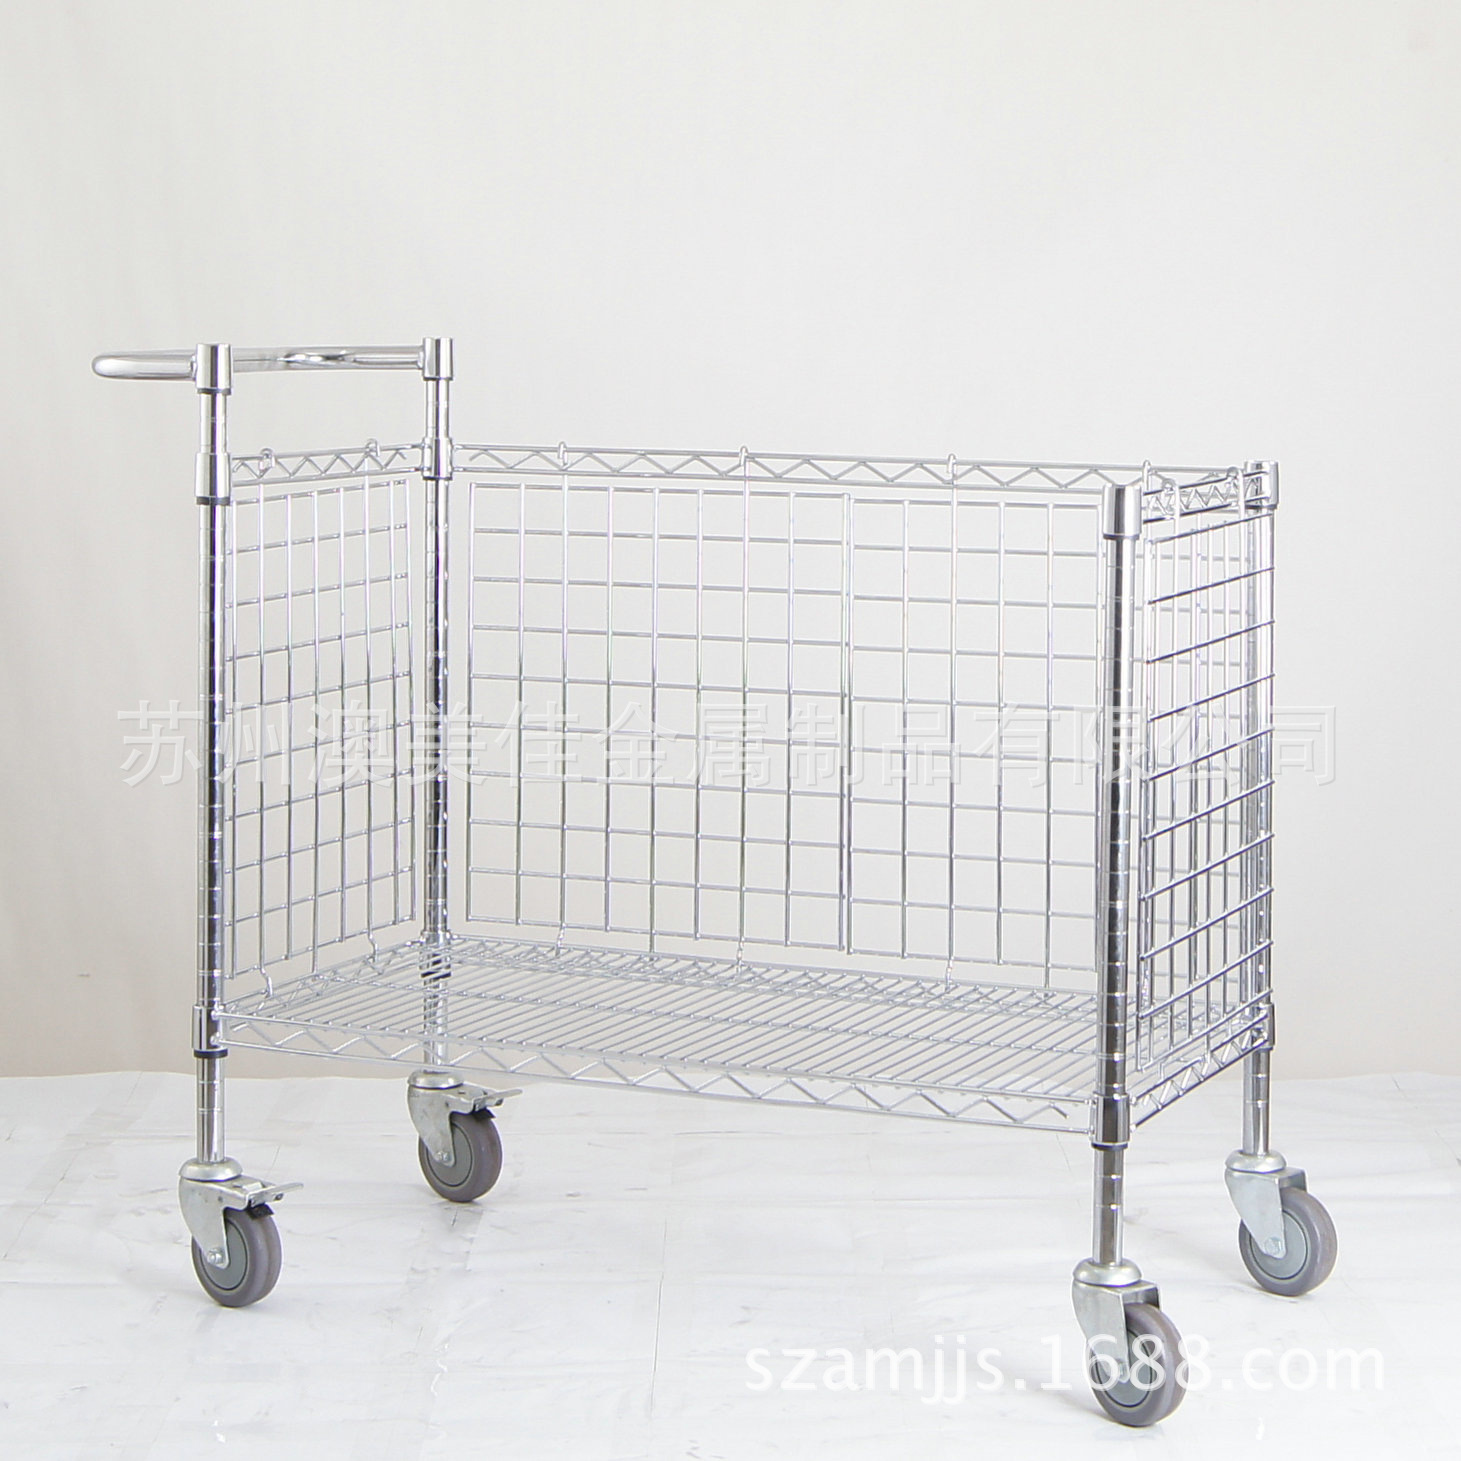 There are net frame middleweight tube logistics warehouse trolleys